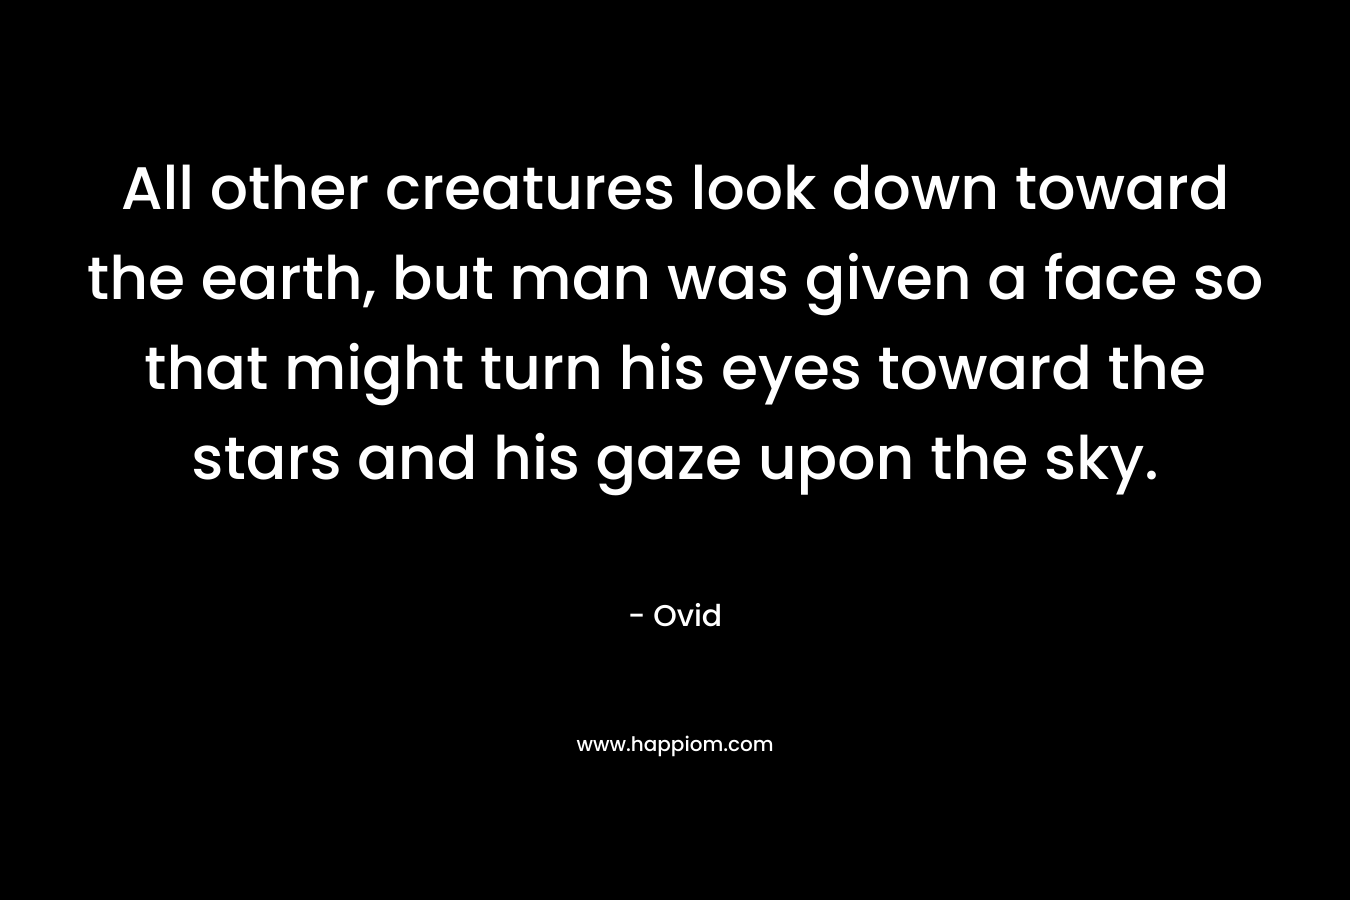 All other creatures look down toward the earth, but man was given a face so that might turn his eyes toward the stars and his gaze upon the sky.